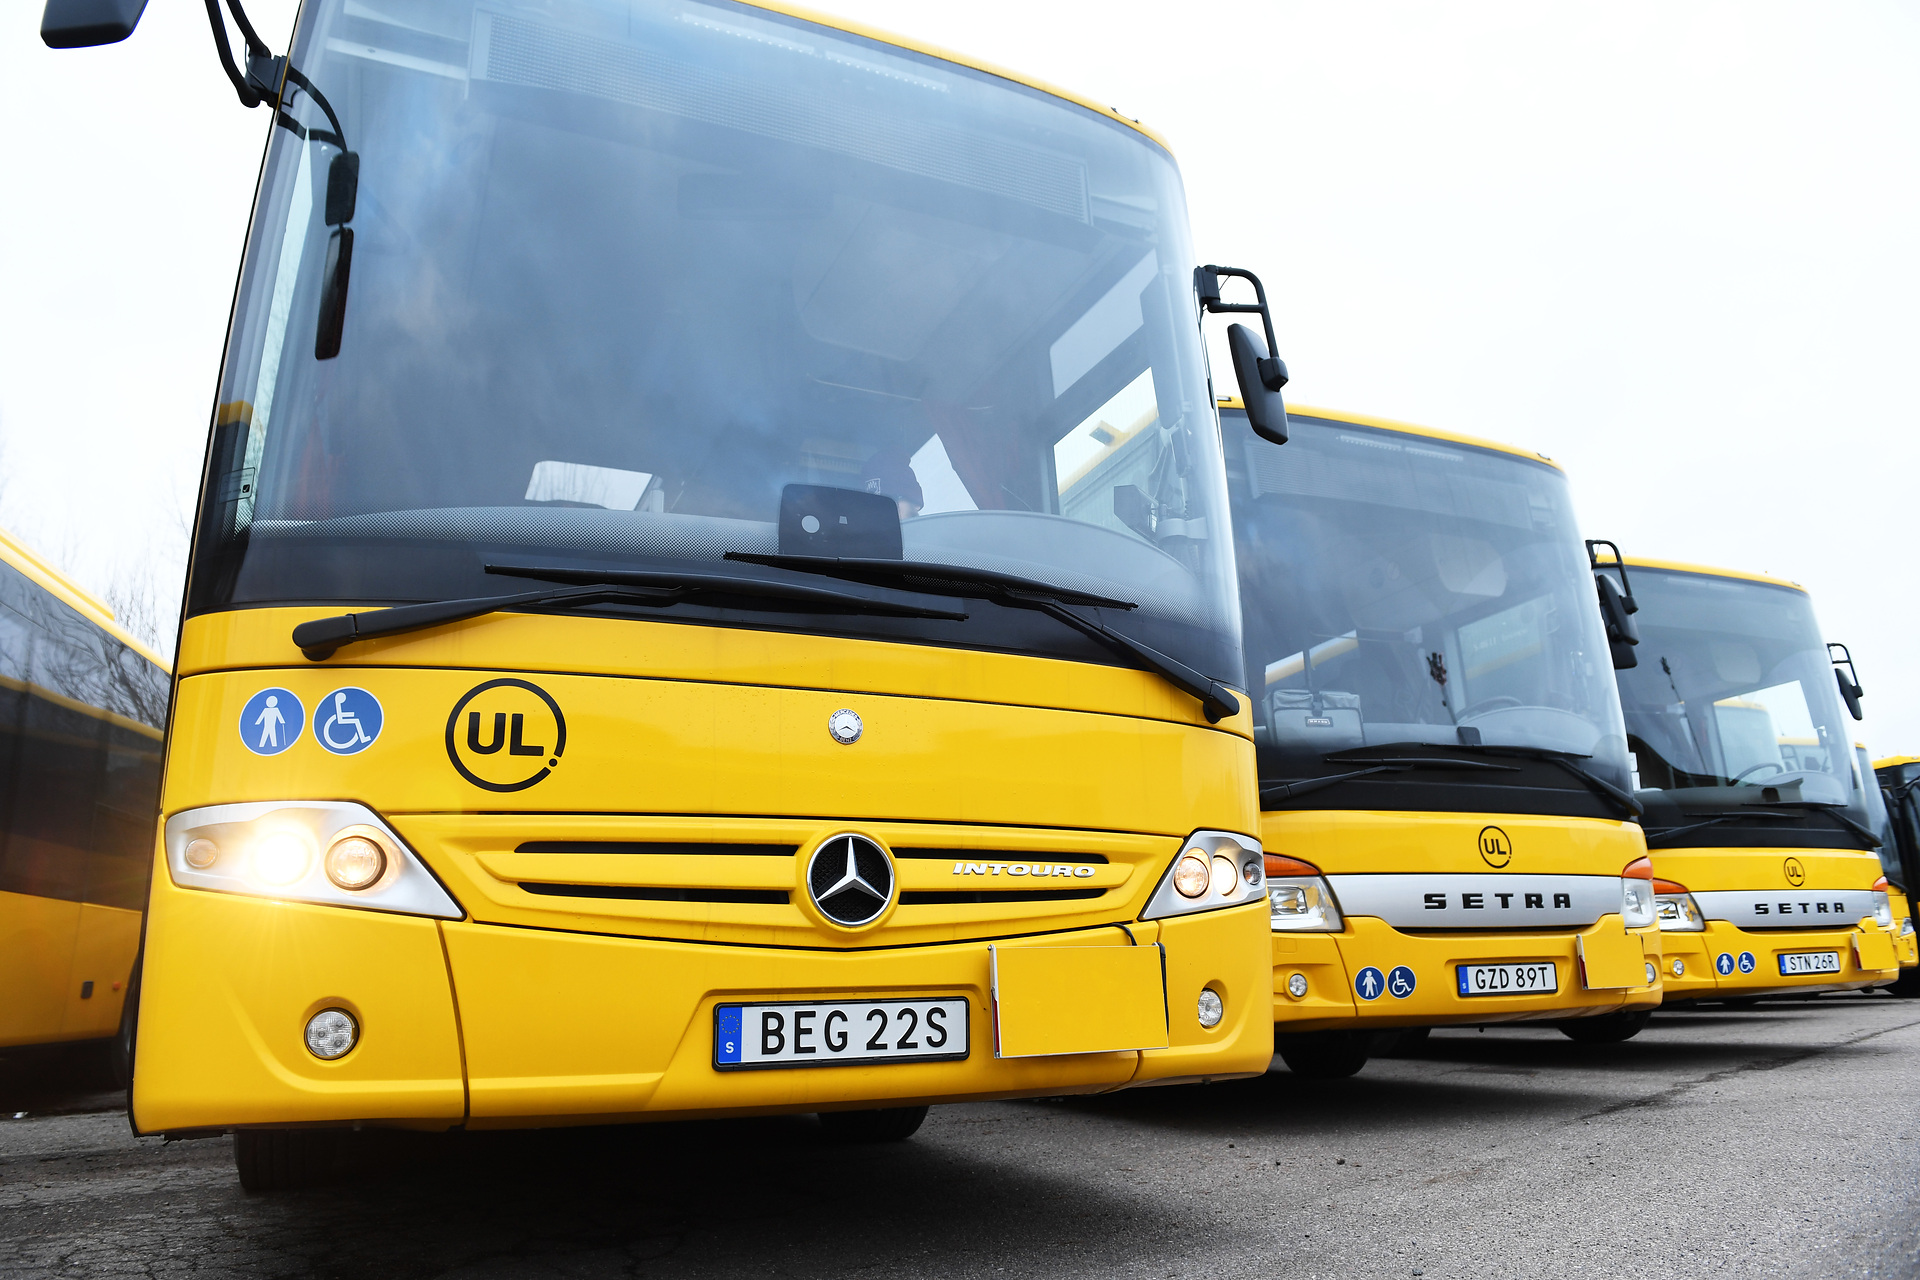 Record order from Sweden: Daimler Buses delivers 112 interurban buses to Mohlins Bussar